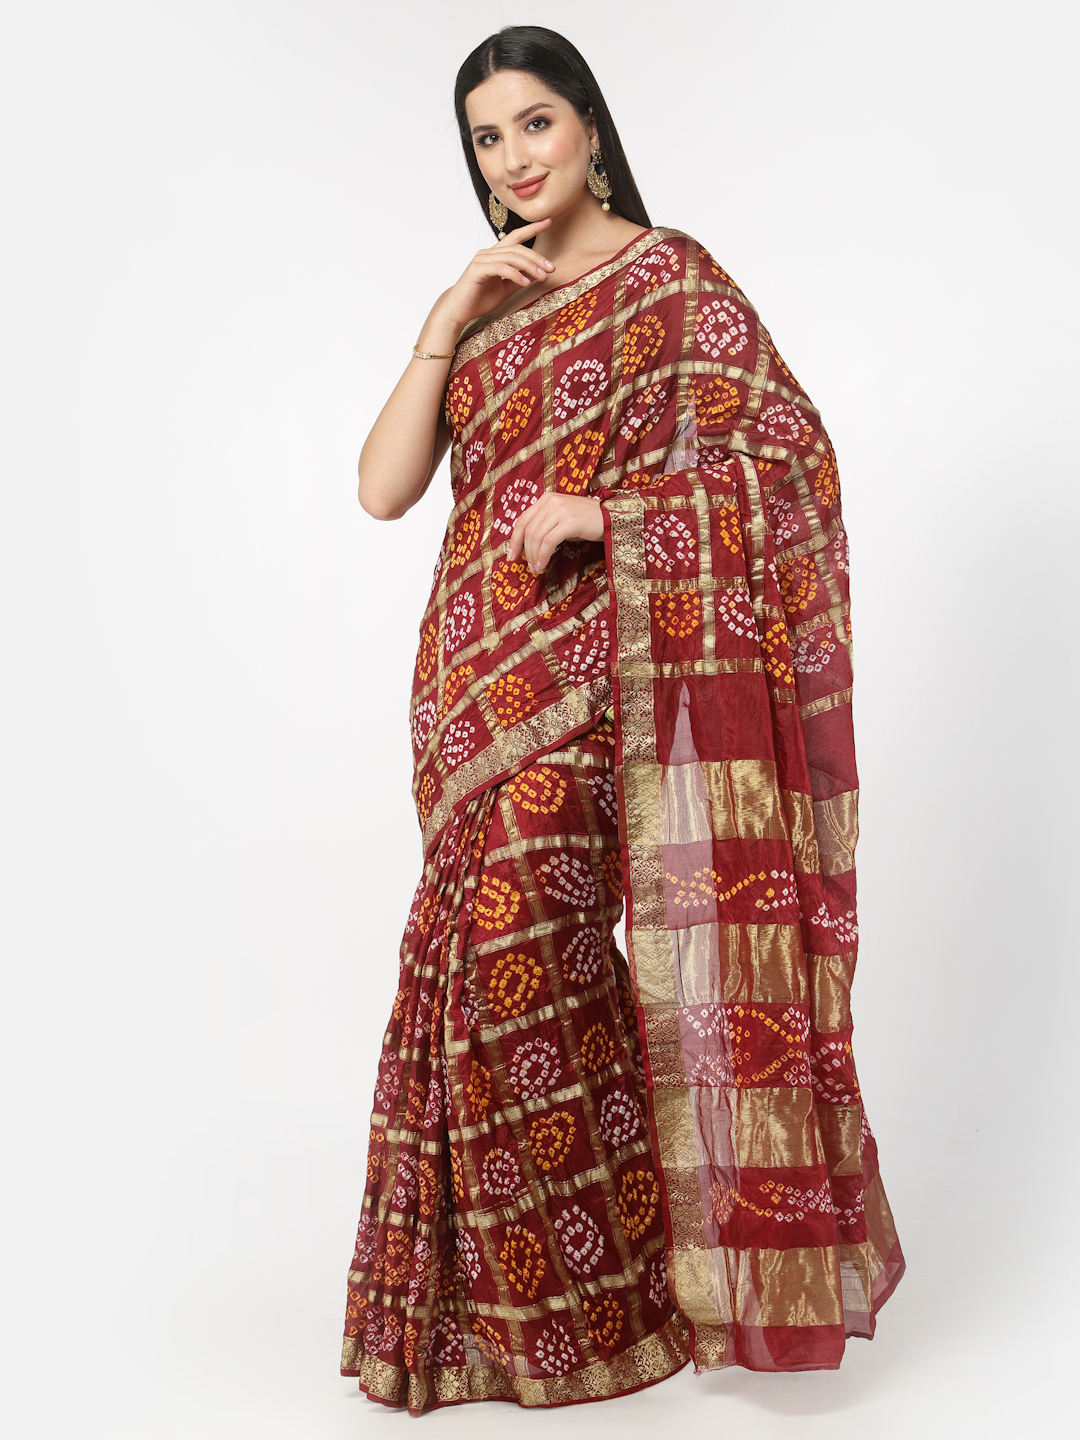 Women Silk Bandhani and Zari Weaving Saree with Unstitched Blouse - Maroon